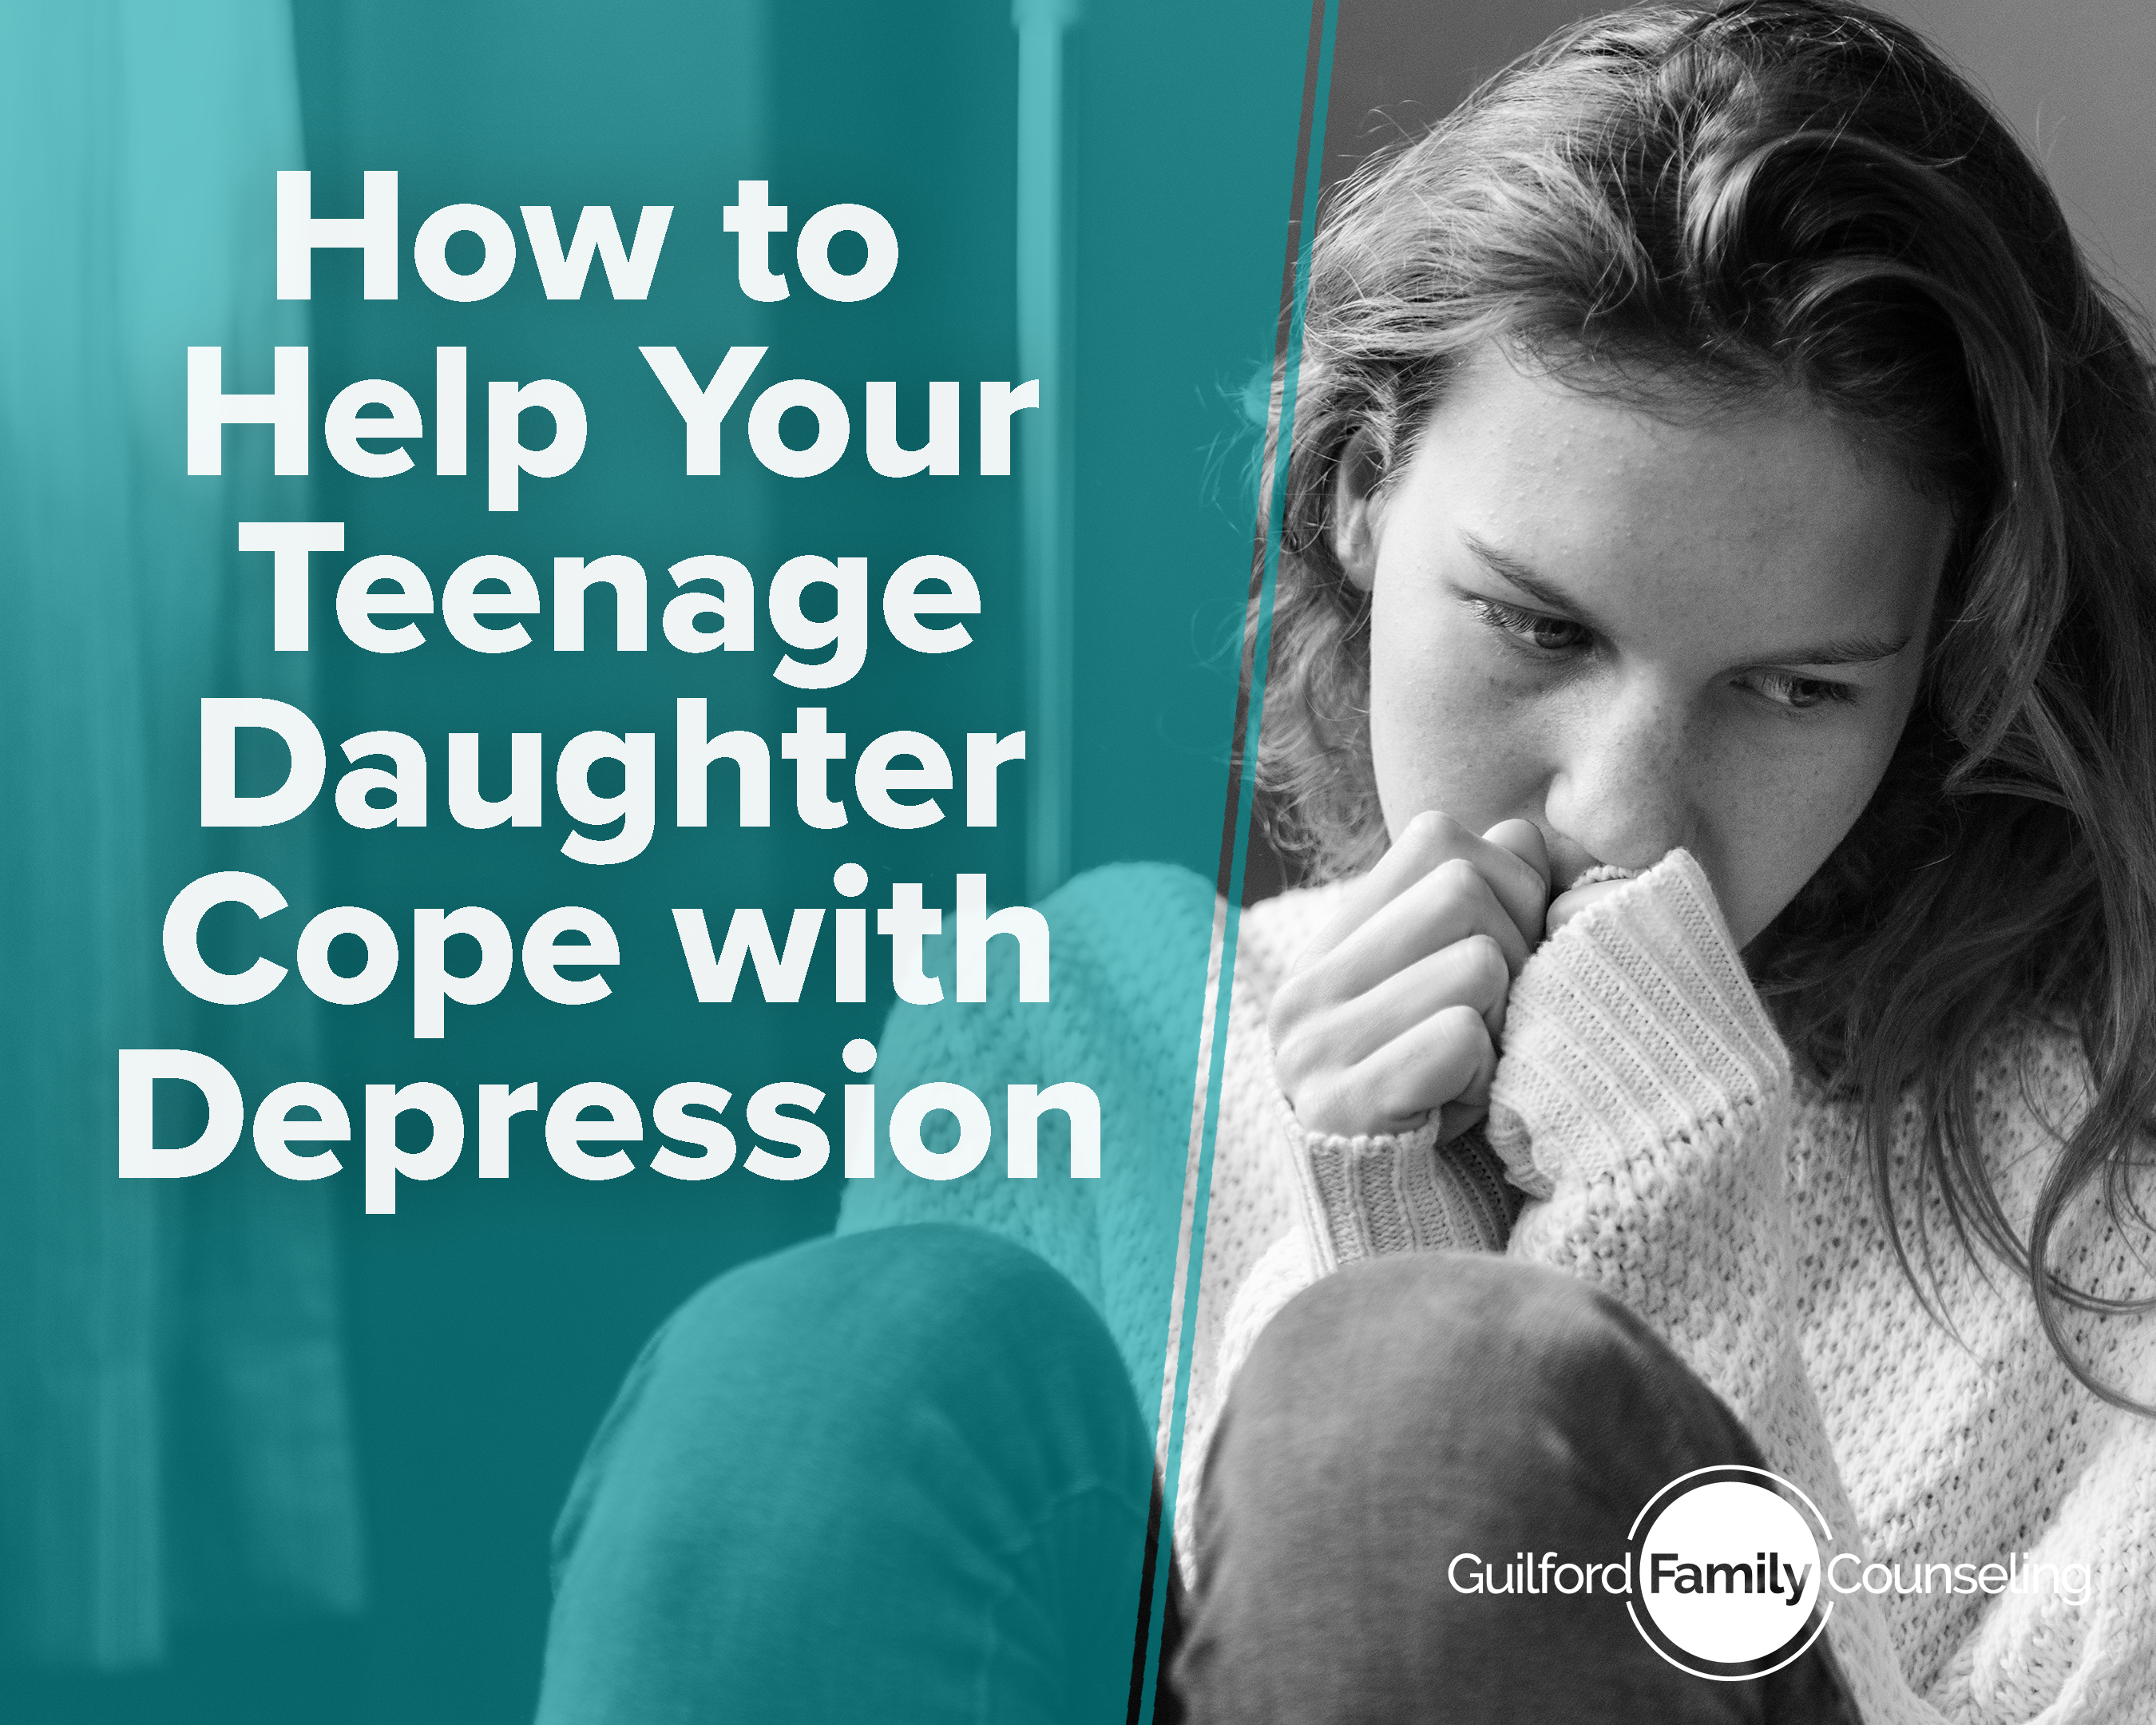 How to Help Your Teenage Daughter Cope with Depression